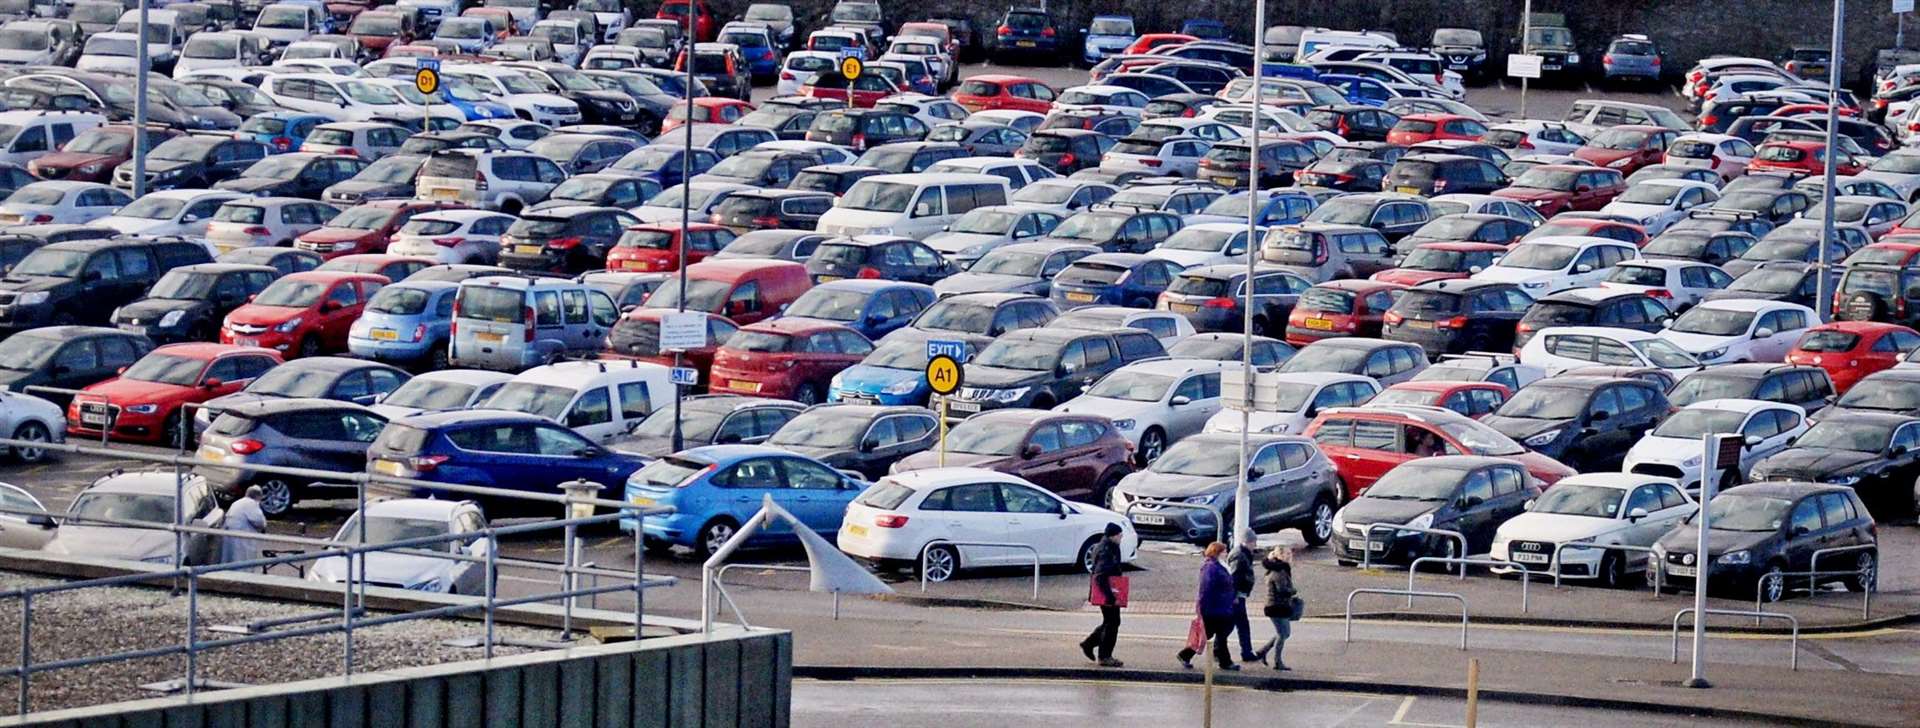 Raigmore Parking locator..There is a parking shortage at Raigmore Hospital...Raigmore Parking locator.Picture:SPP. Image No. ..